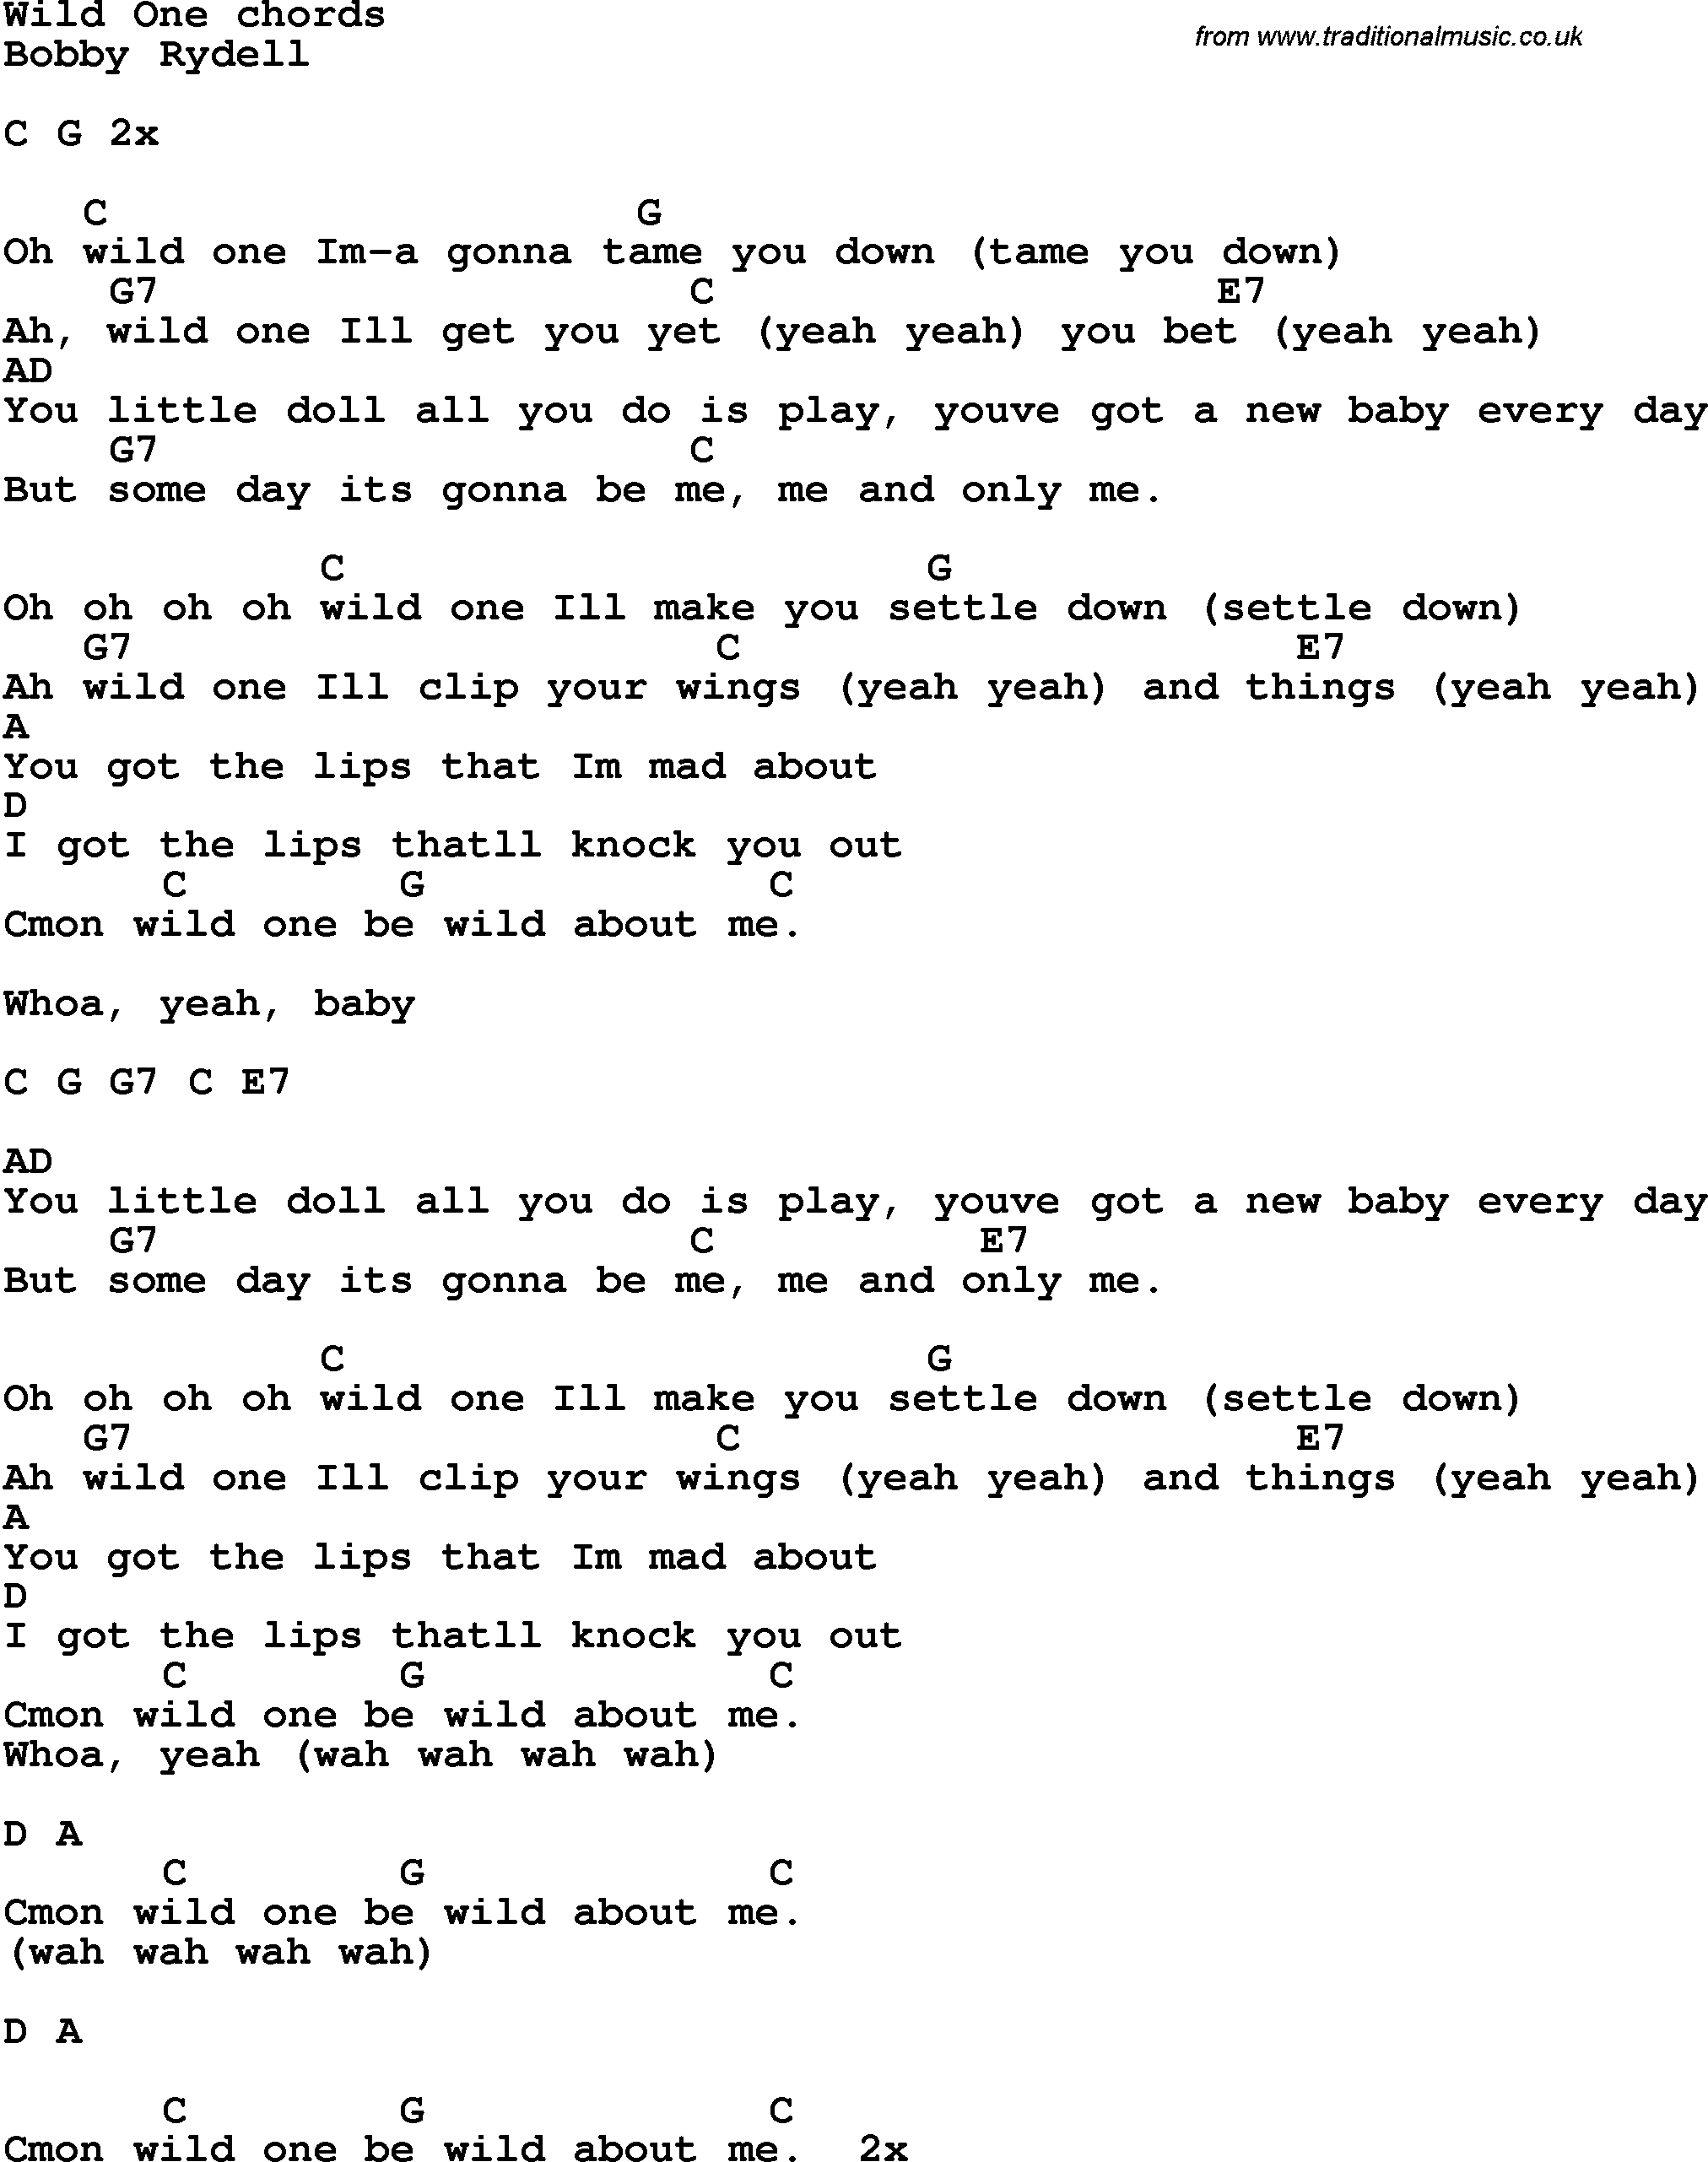 Song Lyrics with guitar chords for Wild One